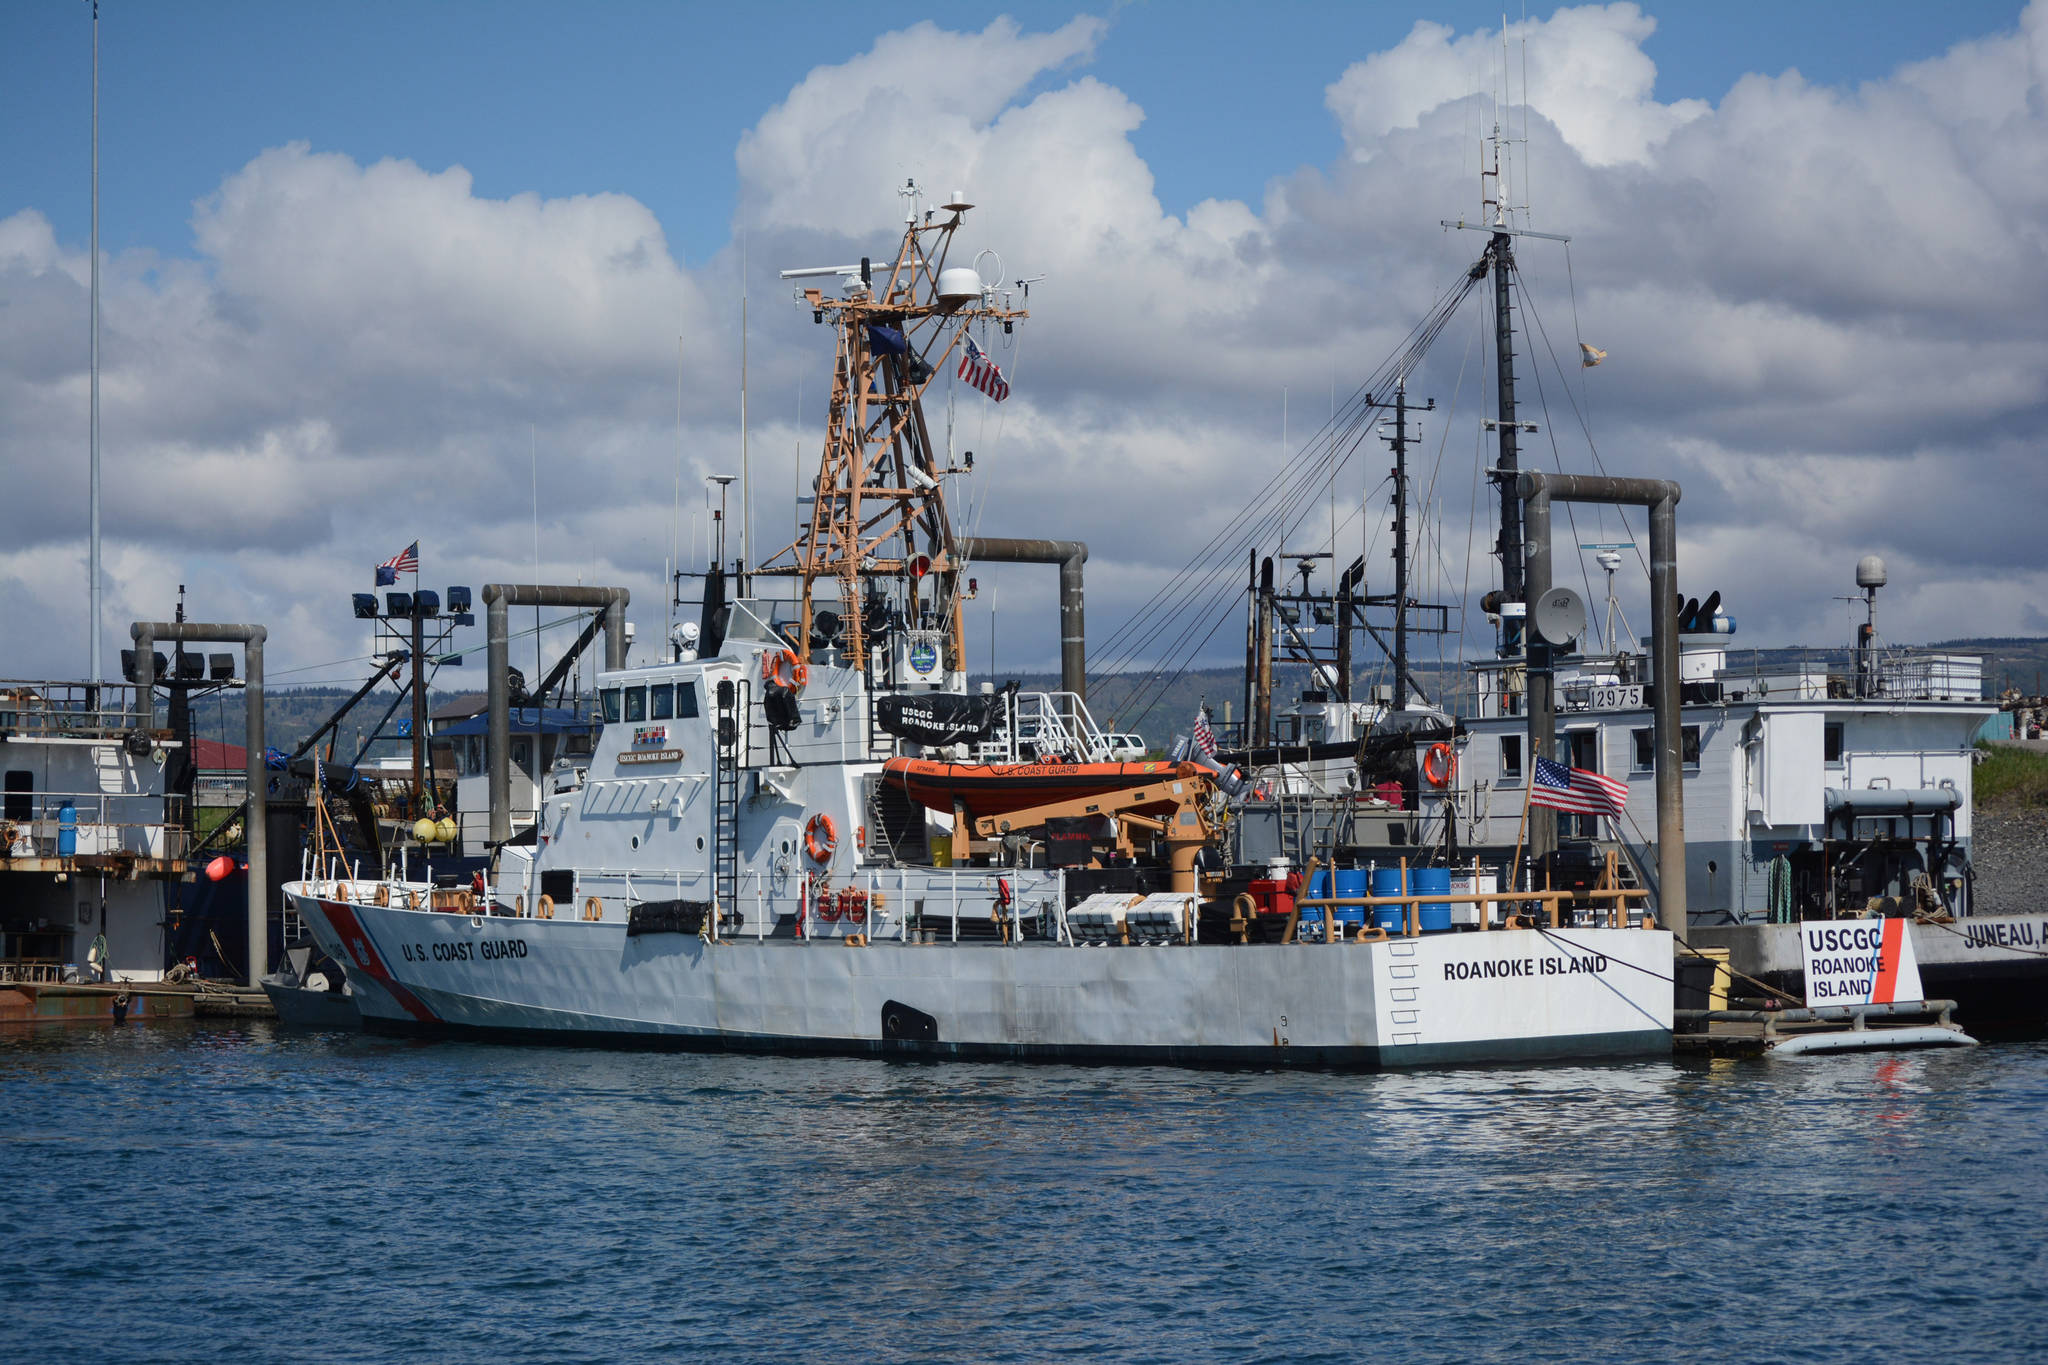 The US Coast Guard Cutter Roanoke Island is moored at the Homer Harbor on June 2, 2015, in Homer, Alaska. Commissioned in 1992, the 110-foot Island class cutter was decommissioned that month. (Photo by Michael Armstrong/Homer News)